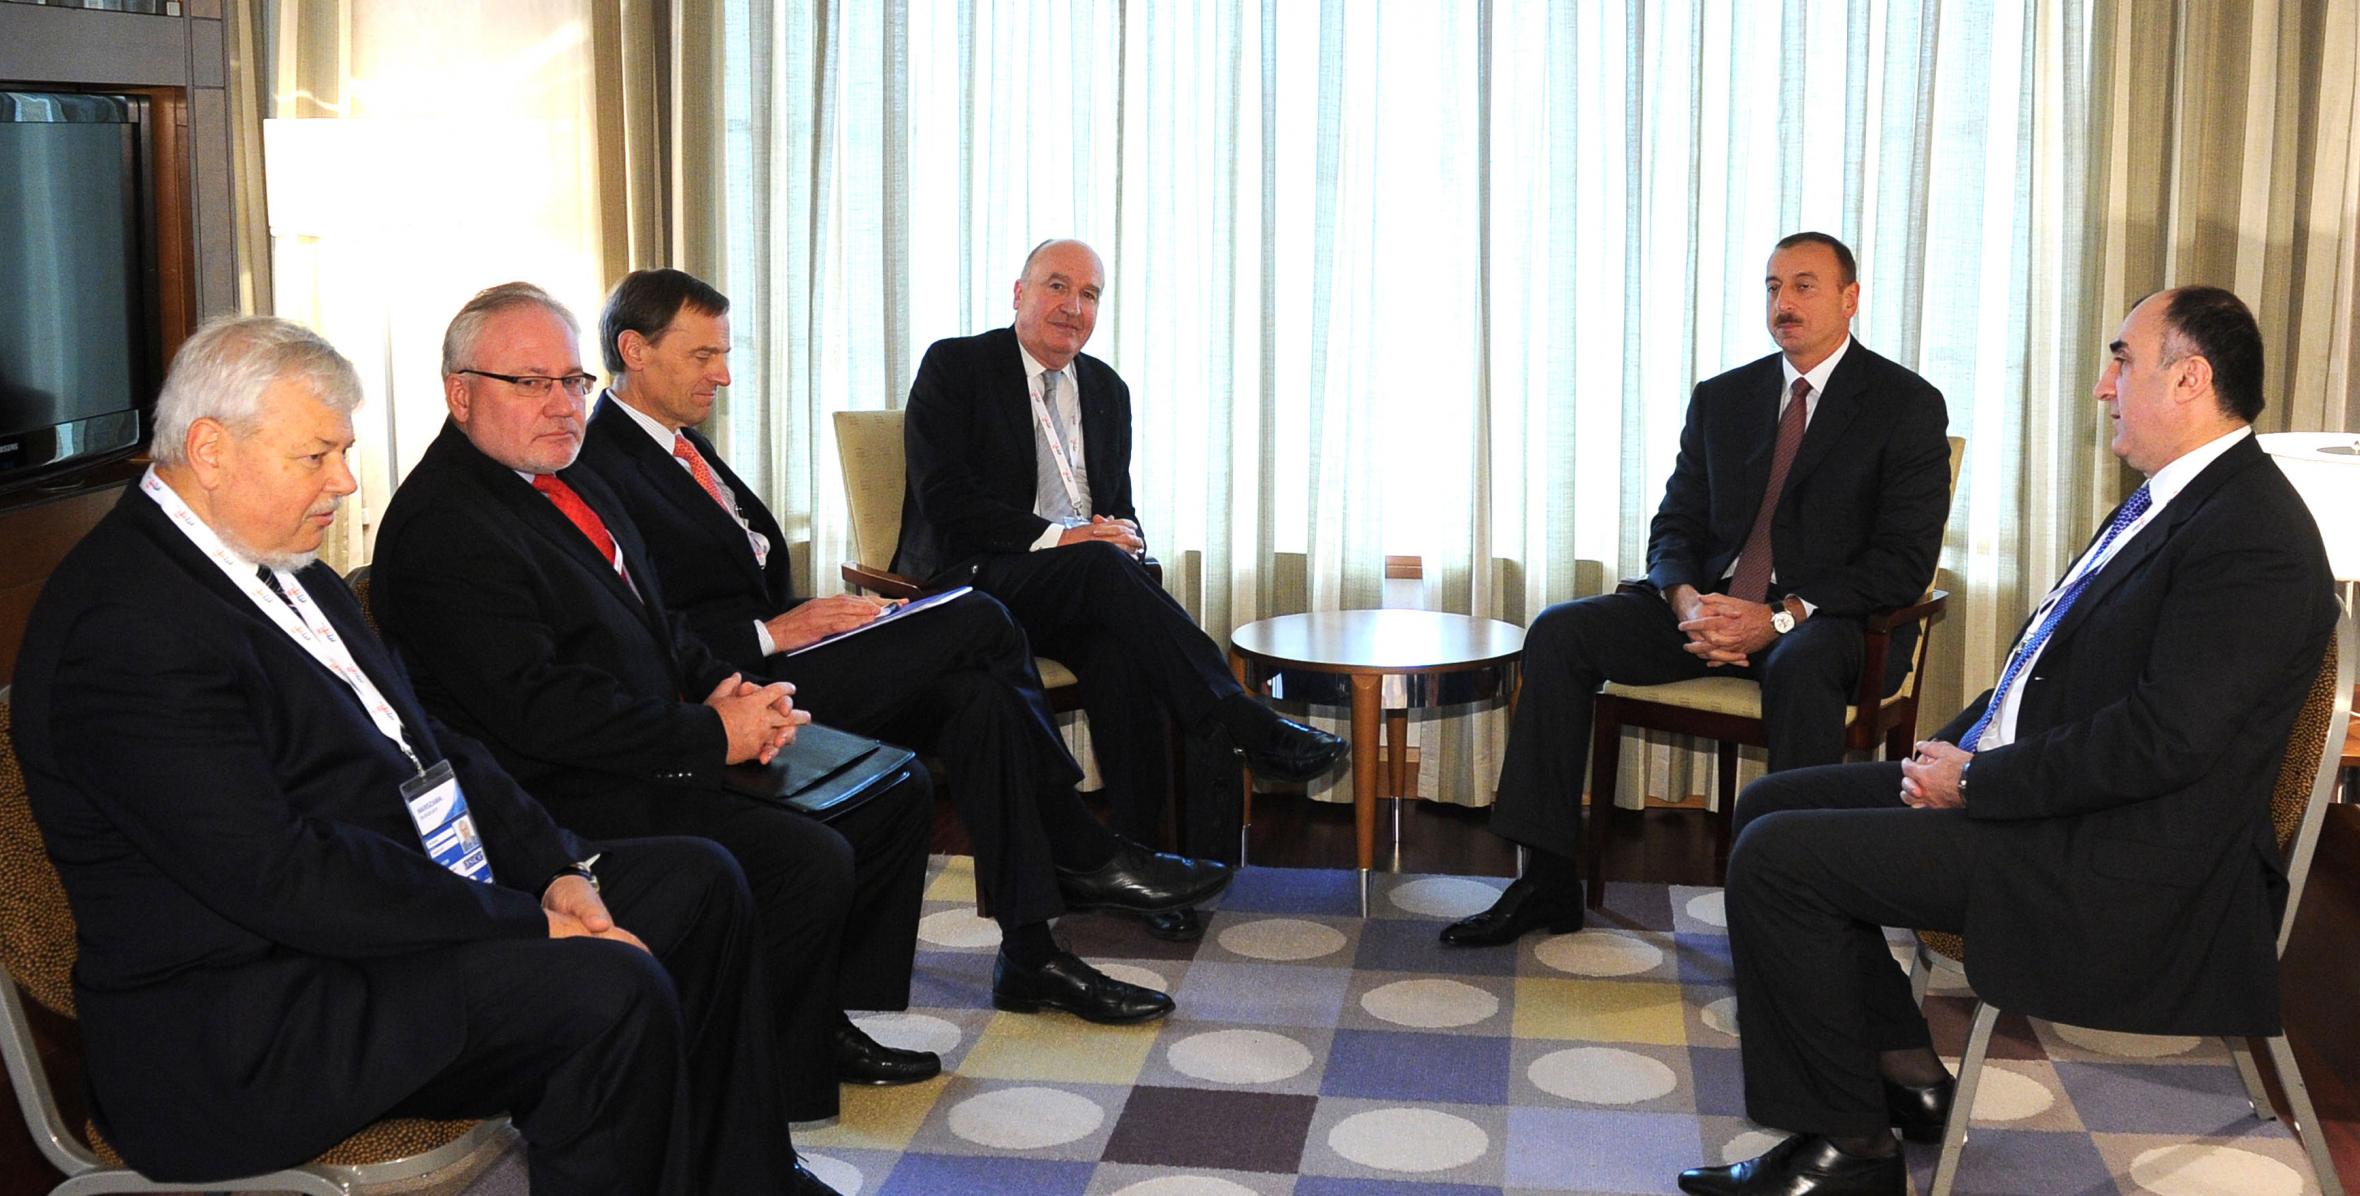 Ilham Aliyev met with OSCE Minsk Group co-chairs